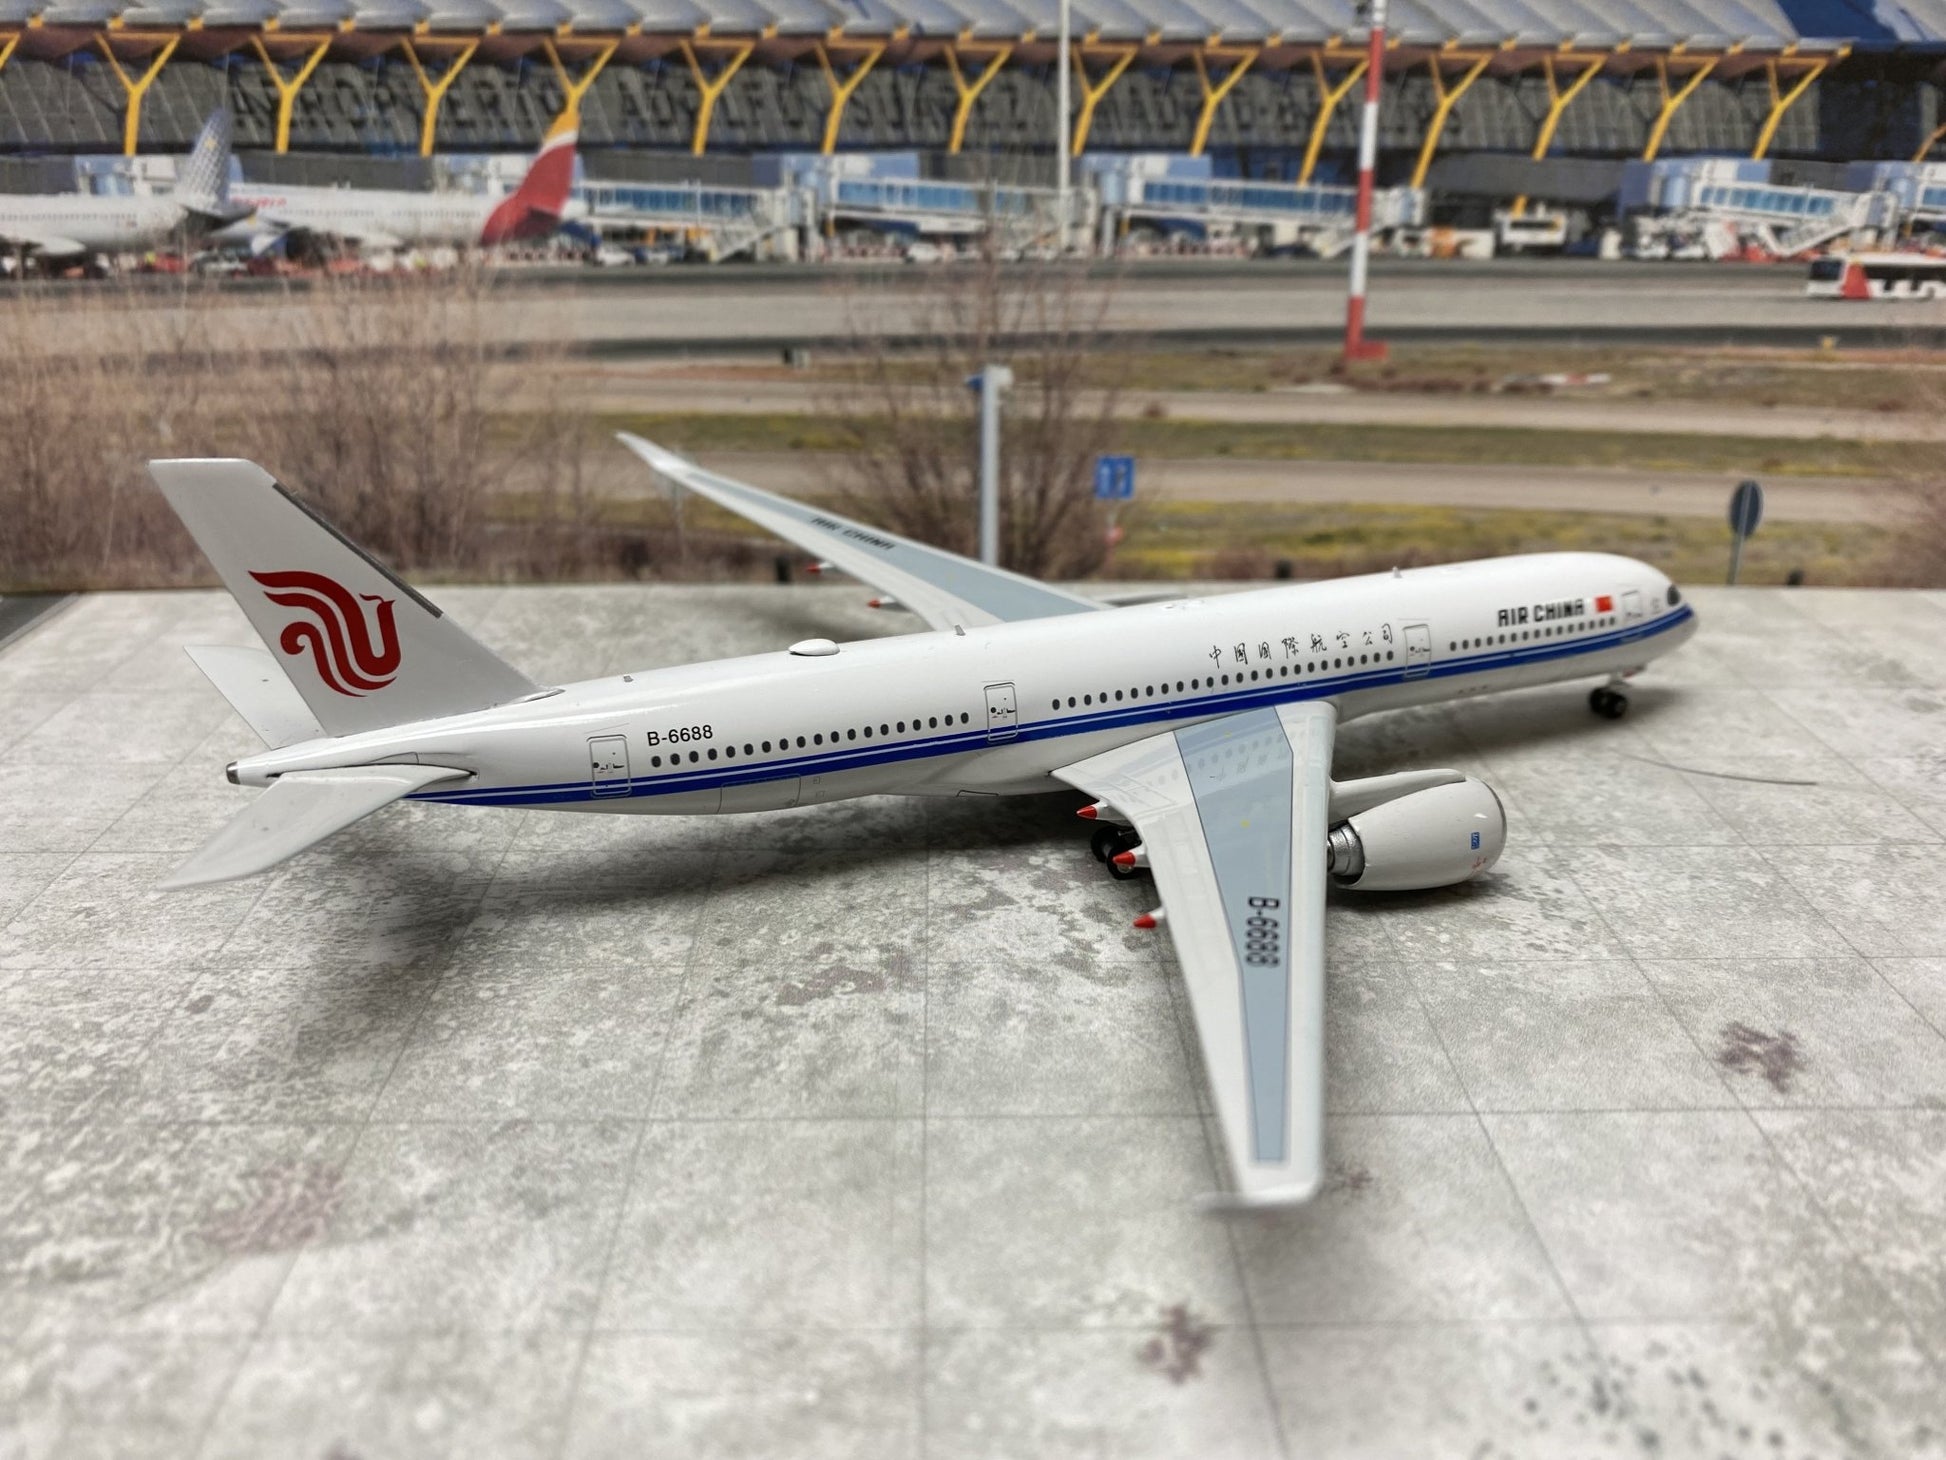 1/400 Air China A350-900 Phoenix Models PH4CCA1201 *Minor paint bubbling on tail and minor glue residue on horizontal stabilizer* - Midwest Model Store